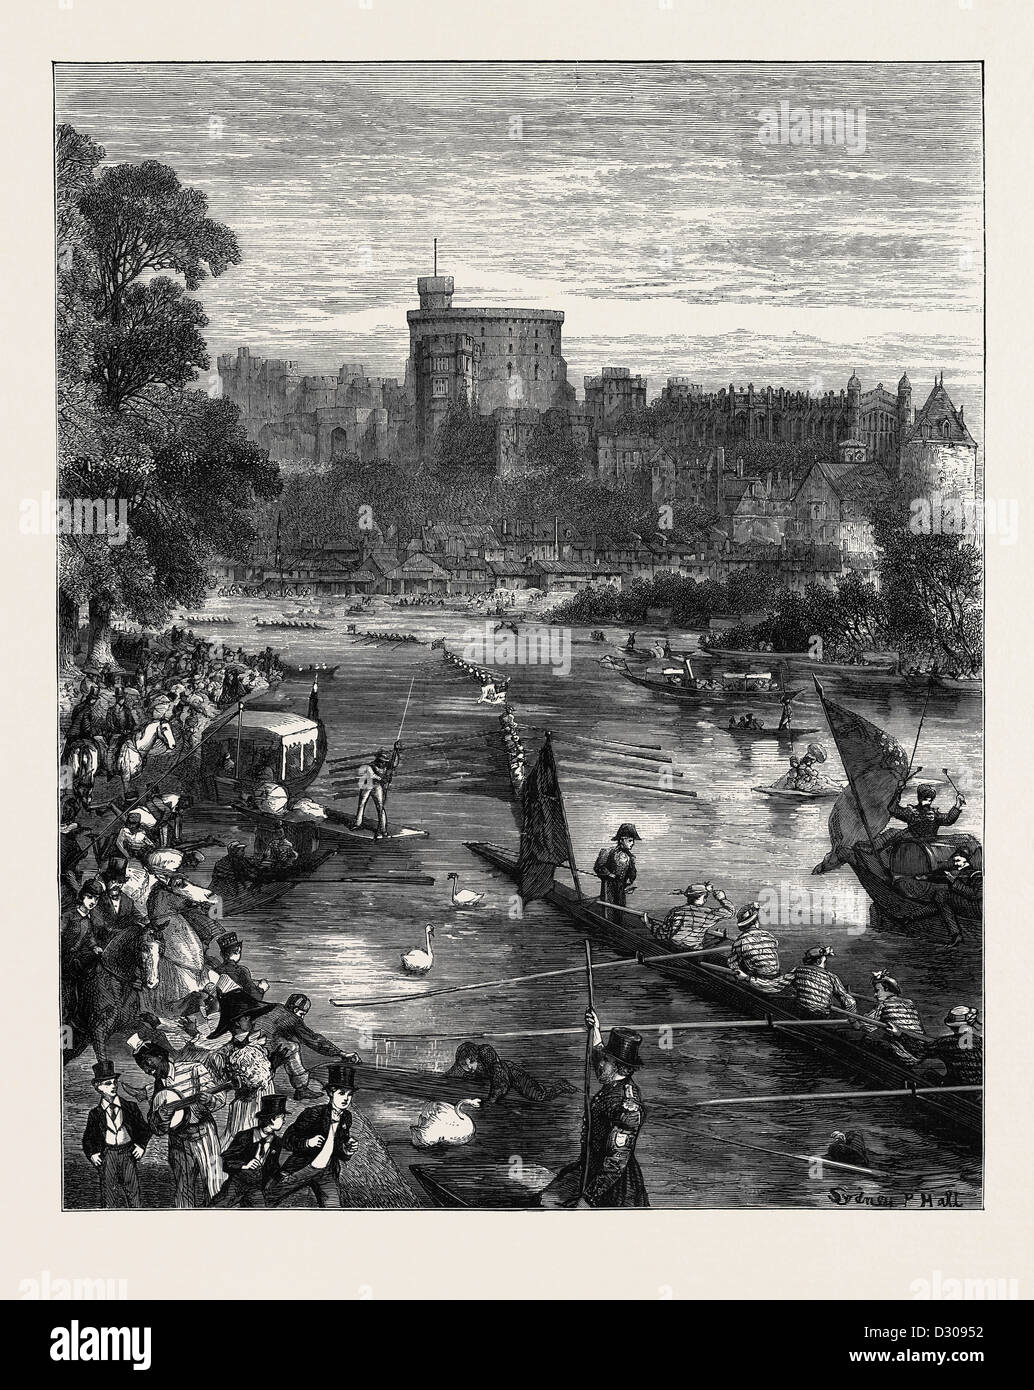 SPEECH DAY AT ETON, THE PROCESSION OF EIGHTS ON THE RIVER, 1870 Stock Photo